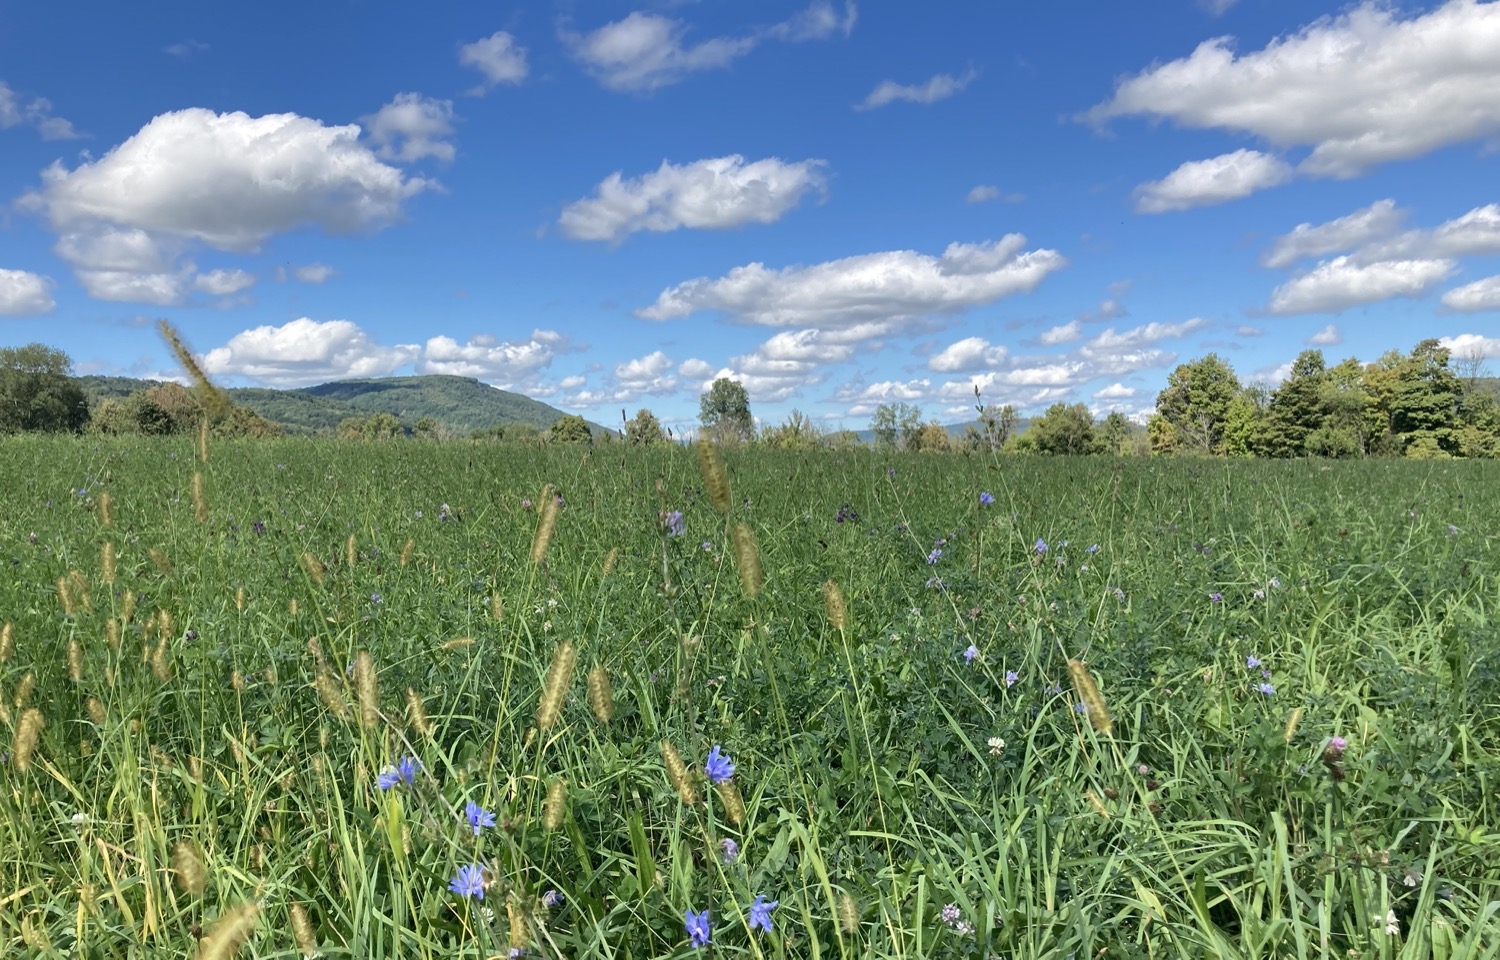 a grassy field with occasional reeds and tiny blue flowers, on a beautiful sunny day with a few white clouds and a rolling mountain in the distance